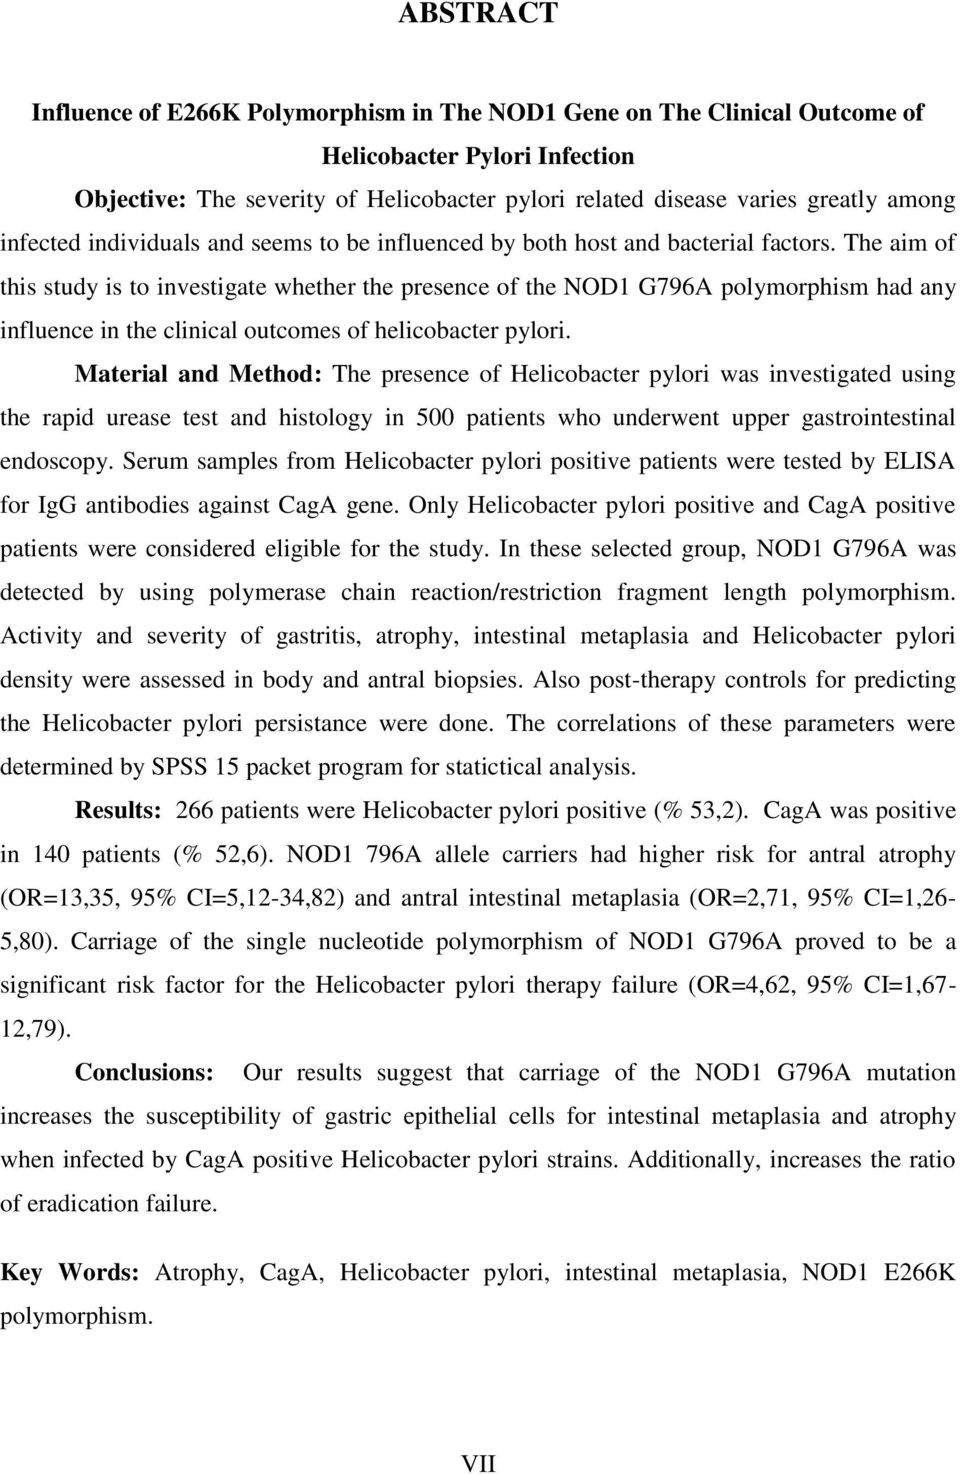 The aim of this study is to investigate whether the presence of the NOD1 G796A polymorphism had any influence in the clinical outcomes of helicobacter pylori.